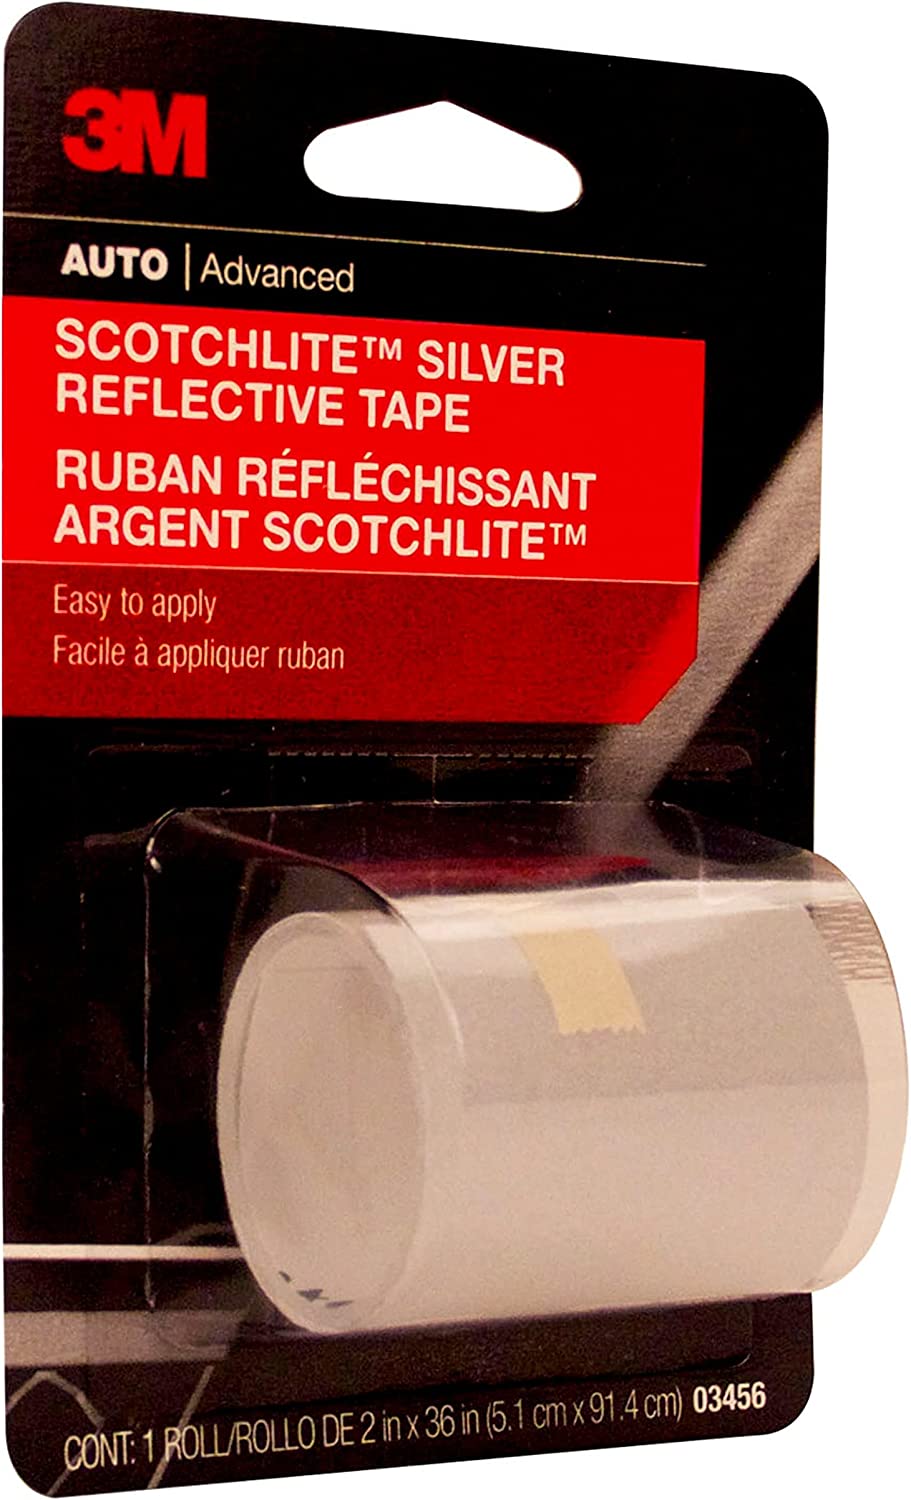 3M Scotchlite Silver Reflective Tape 03456 2 in x 36 in 1 Roll